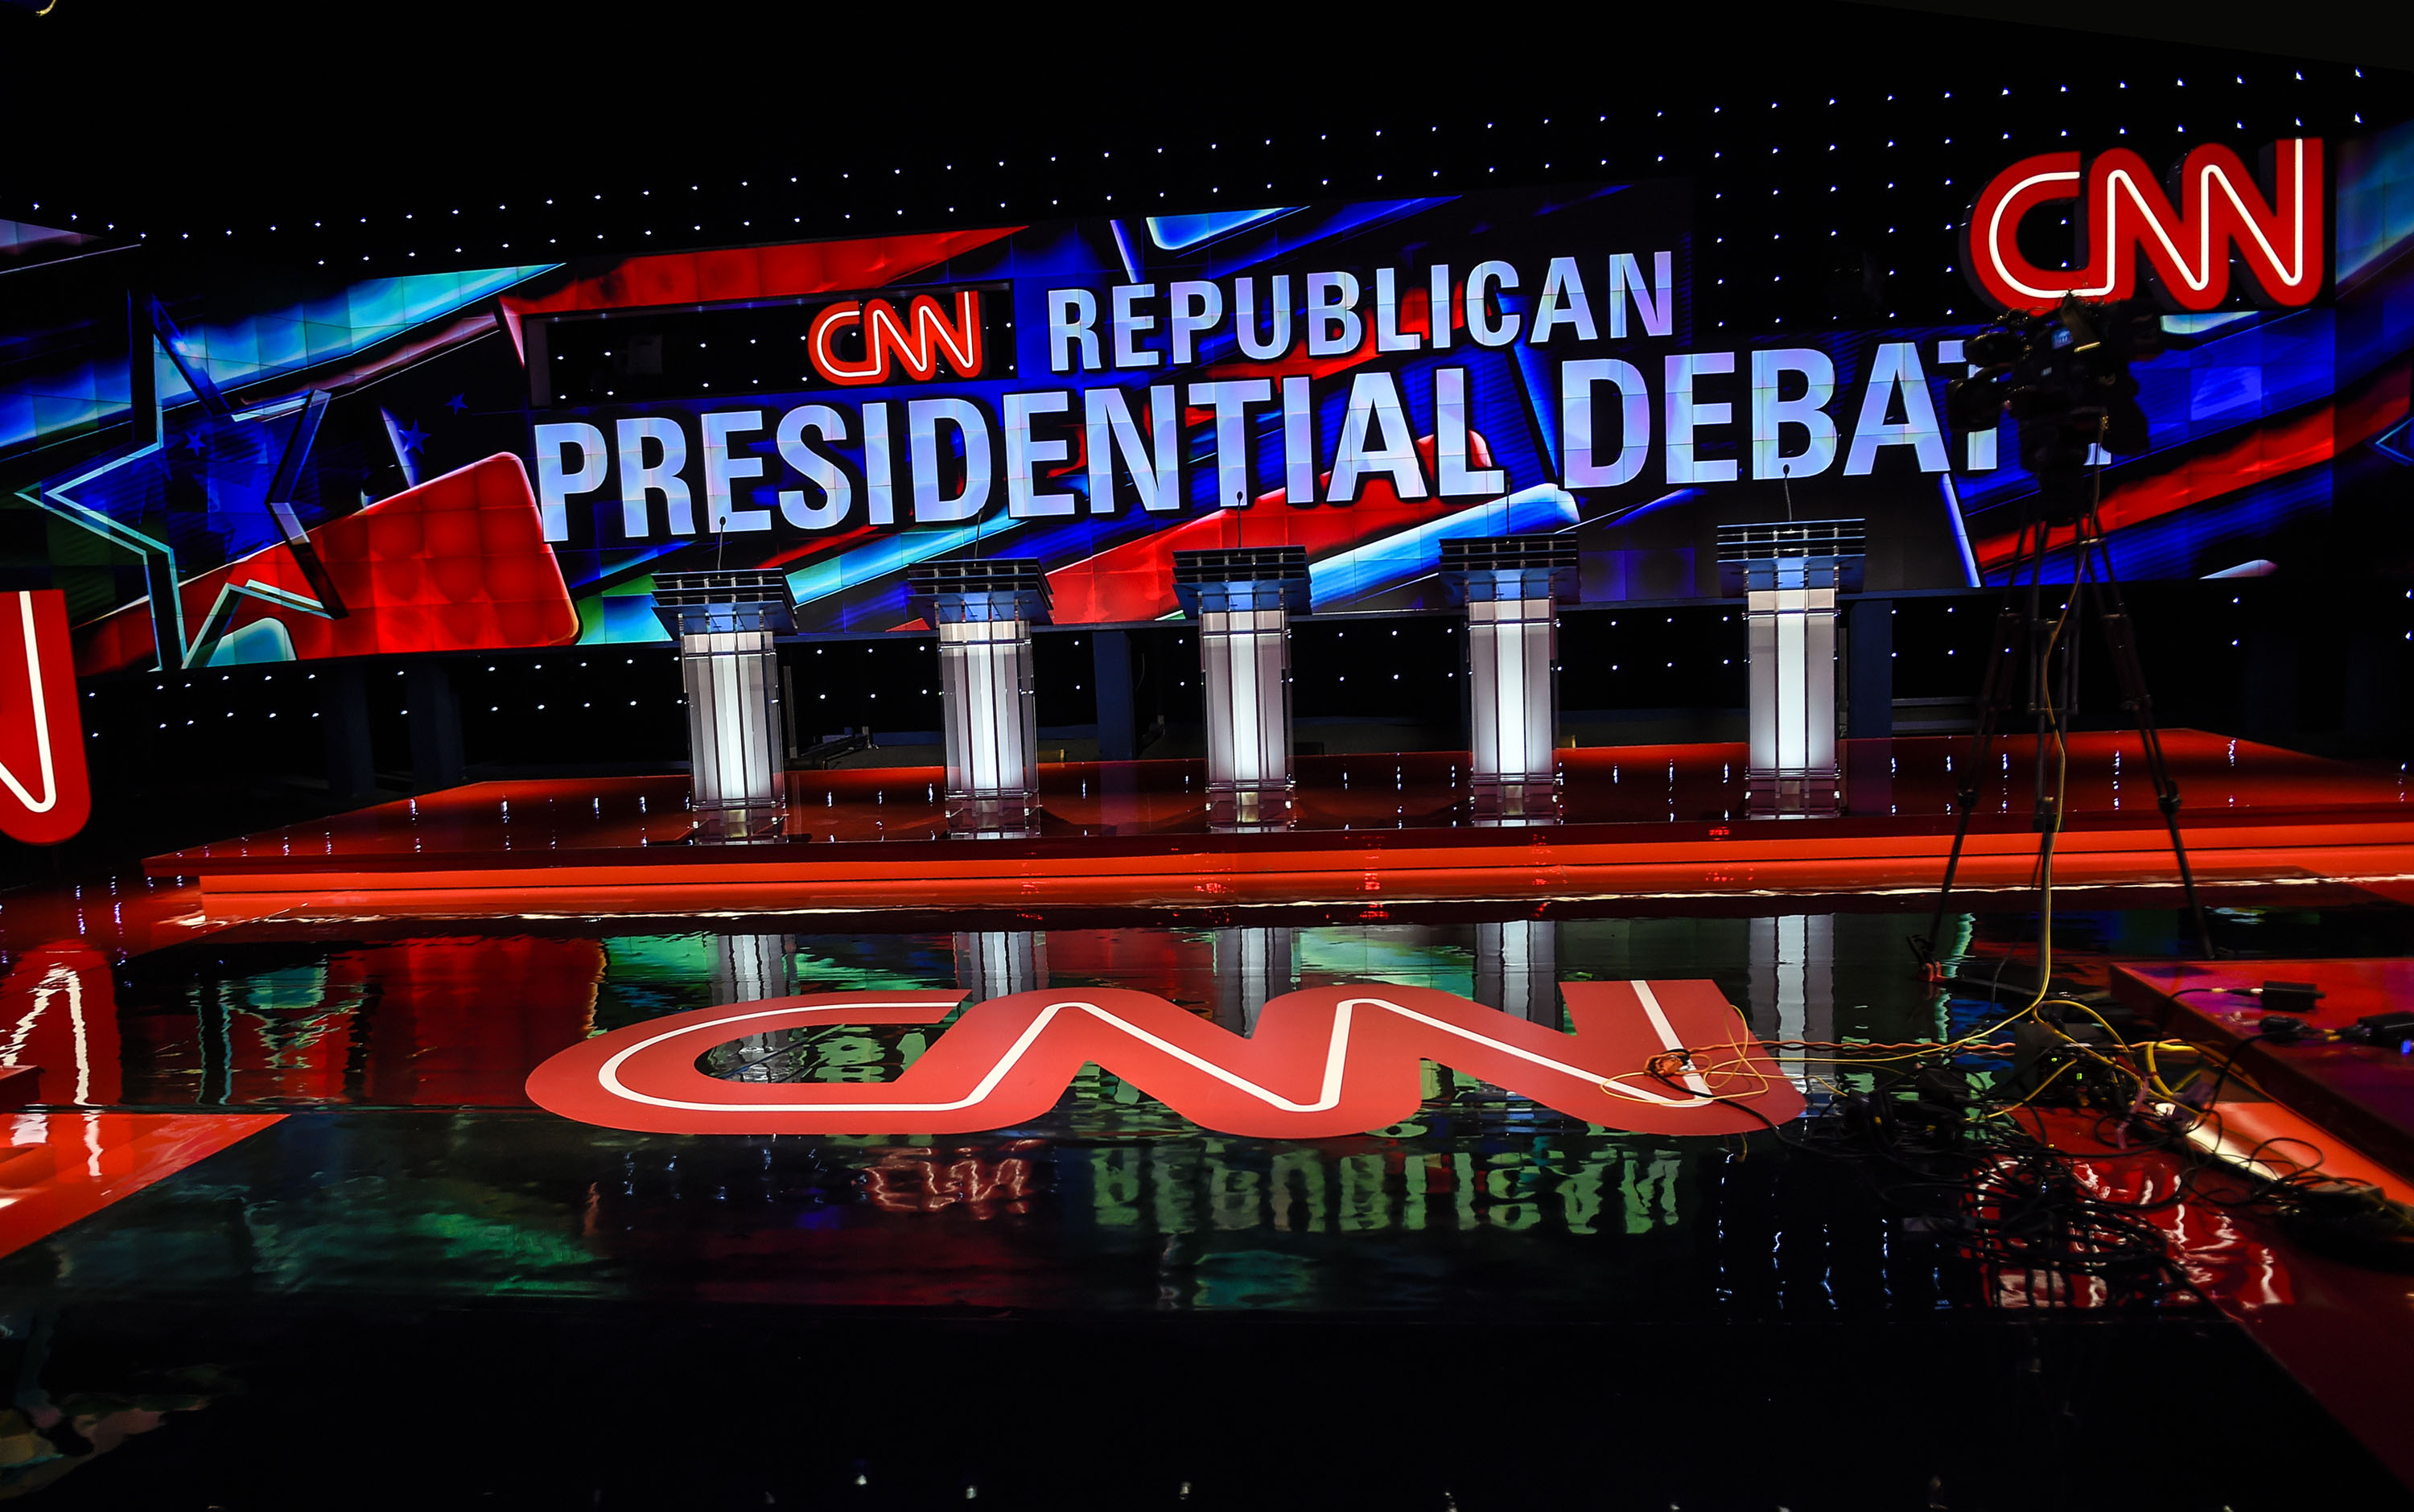 GOP Presidential Candidates Gear Up for August Debate - Trump's Status and Potential Vice Presidential Picks Discussed